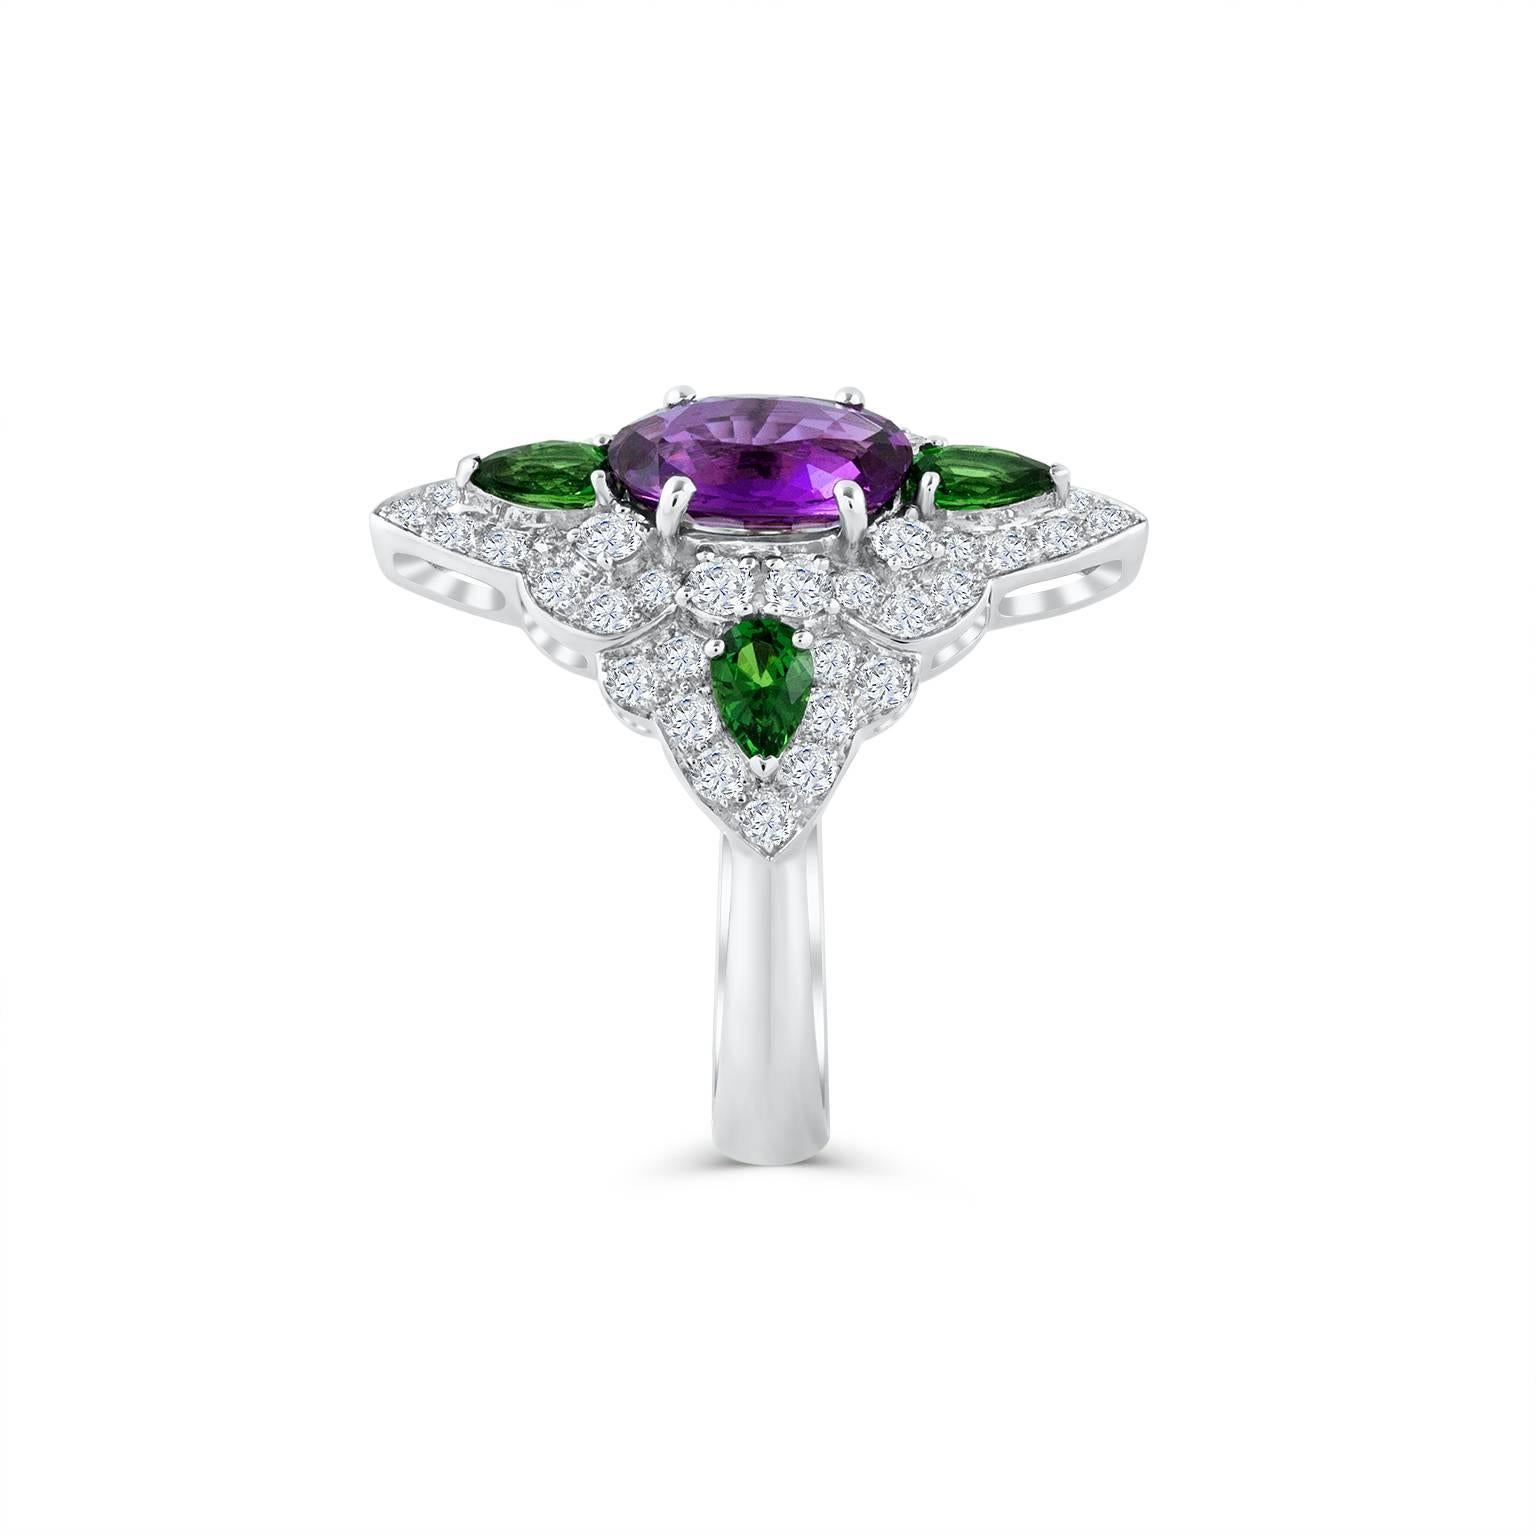 Add color to your style with this fashionable ring by Roman Malakov. Showcases a 1.90 carat GIA certified oval shape pinkish purple sapphire accented by 4 pear shaped green tsavorite garnets weighing 0.75 carats total. Finished with sparkling